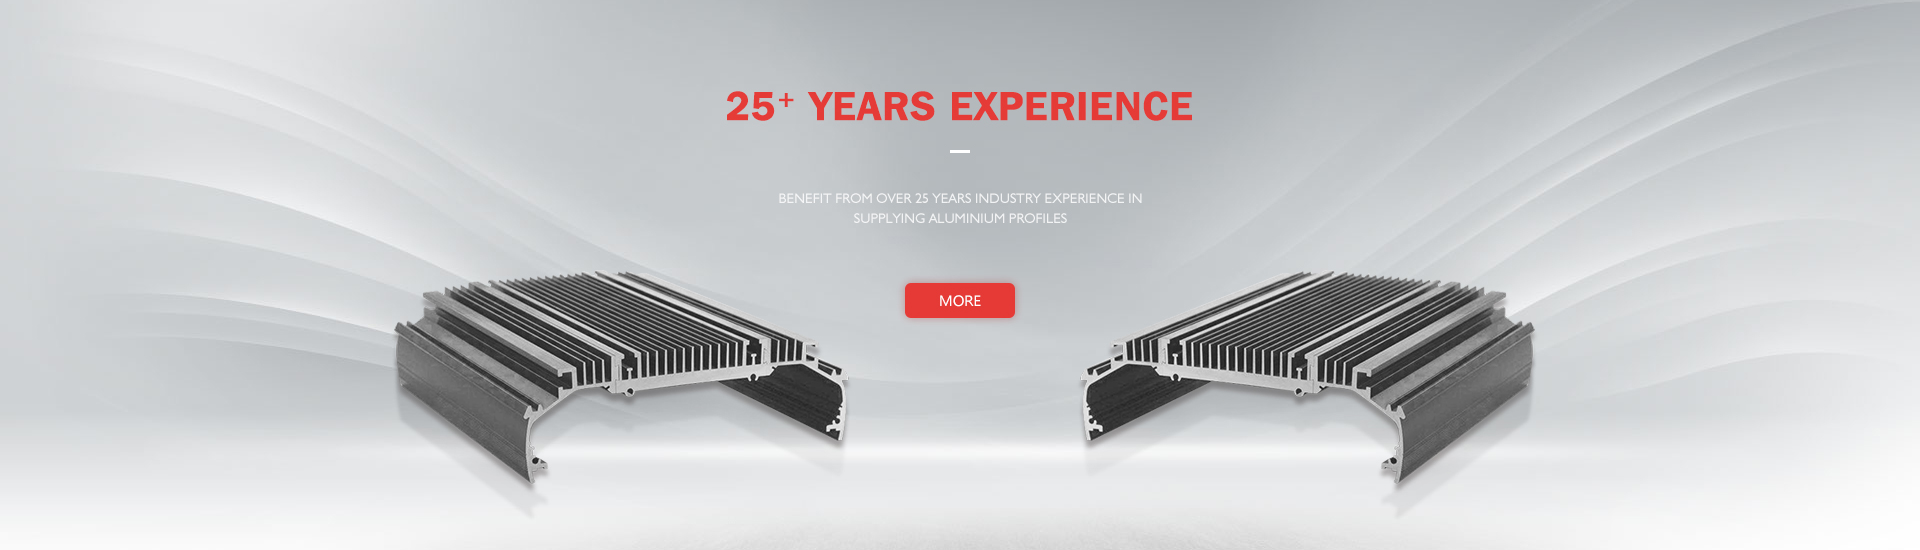 25+ year experience